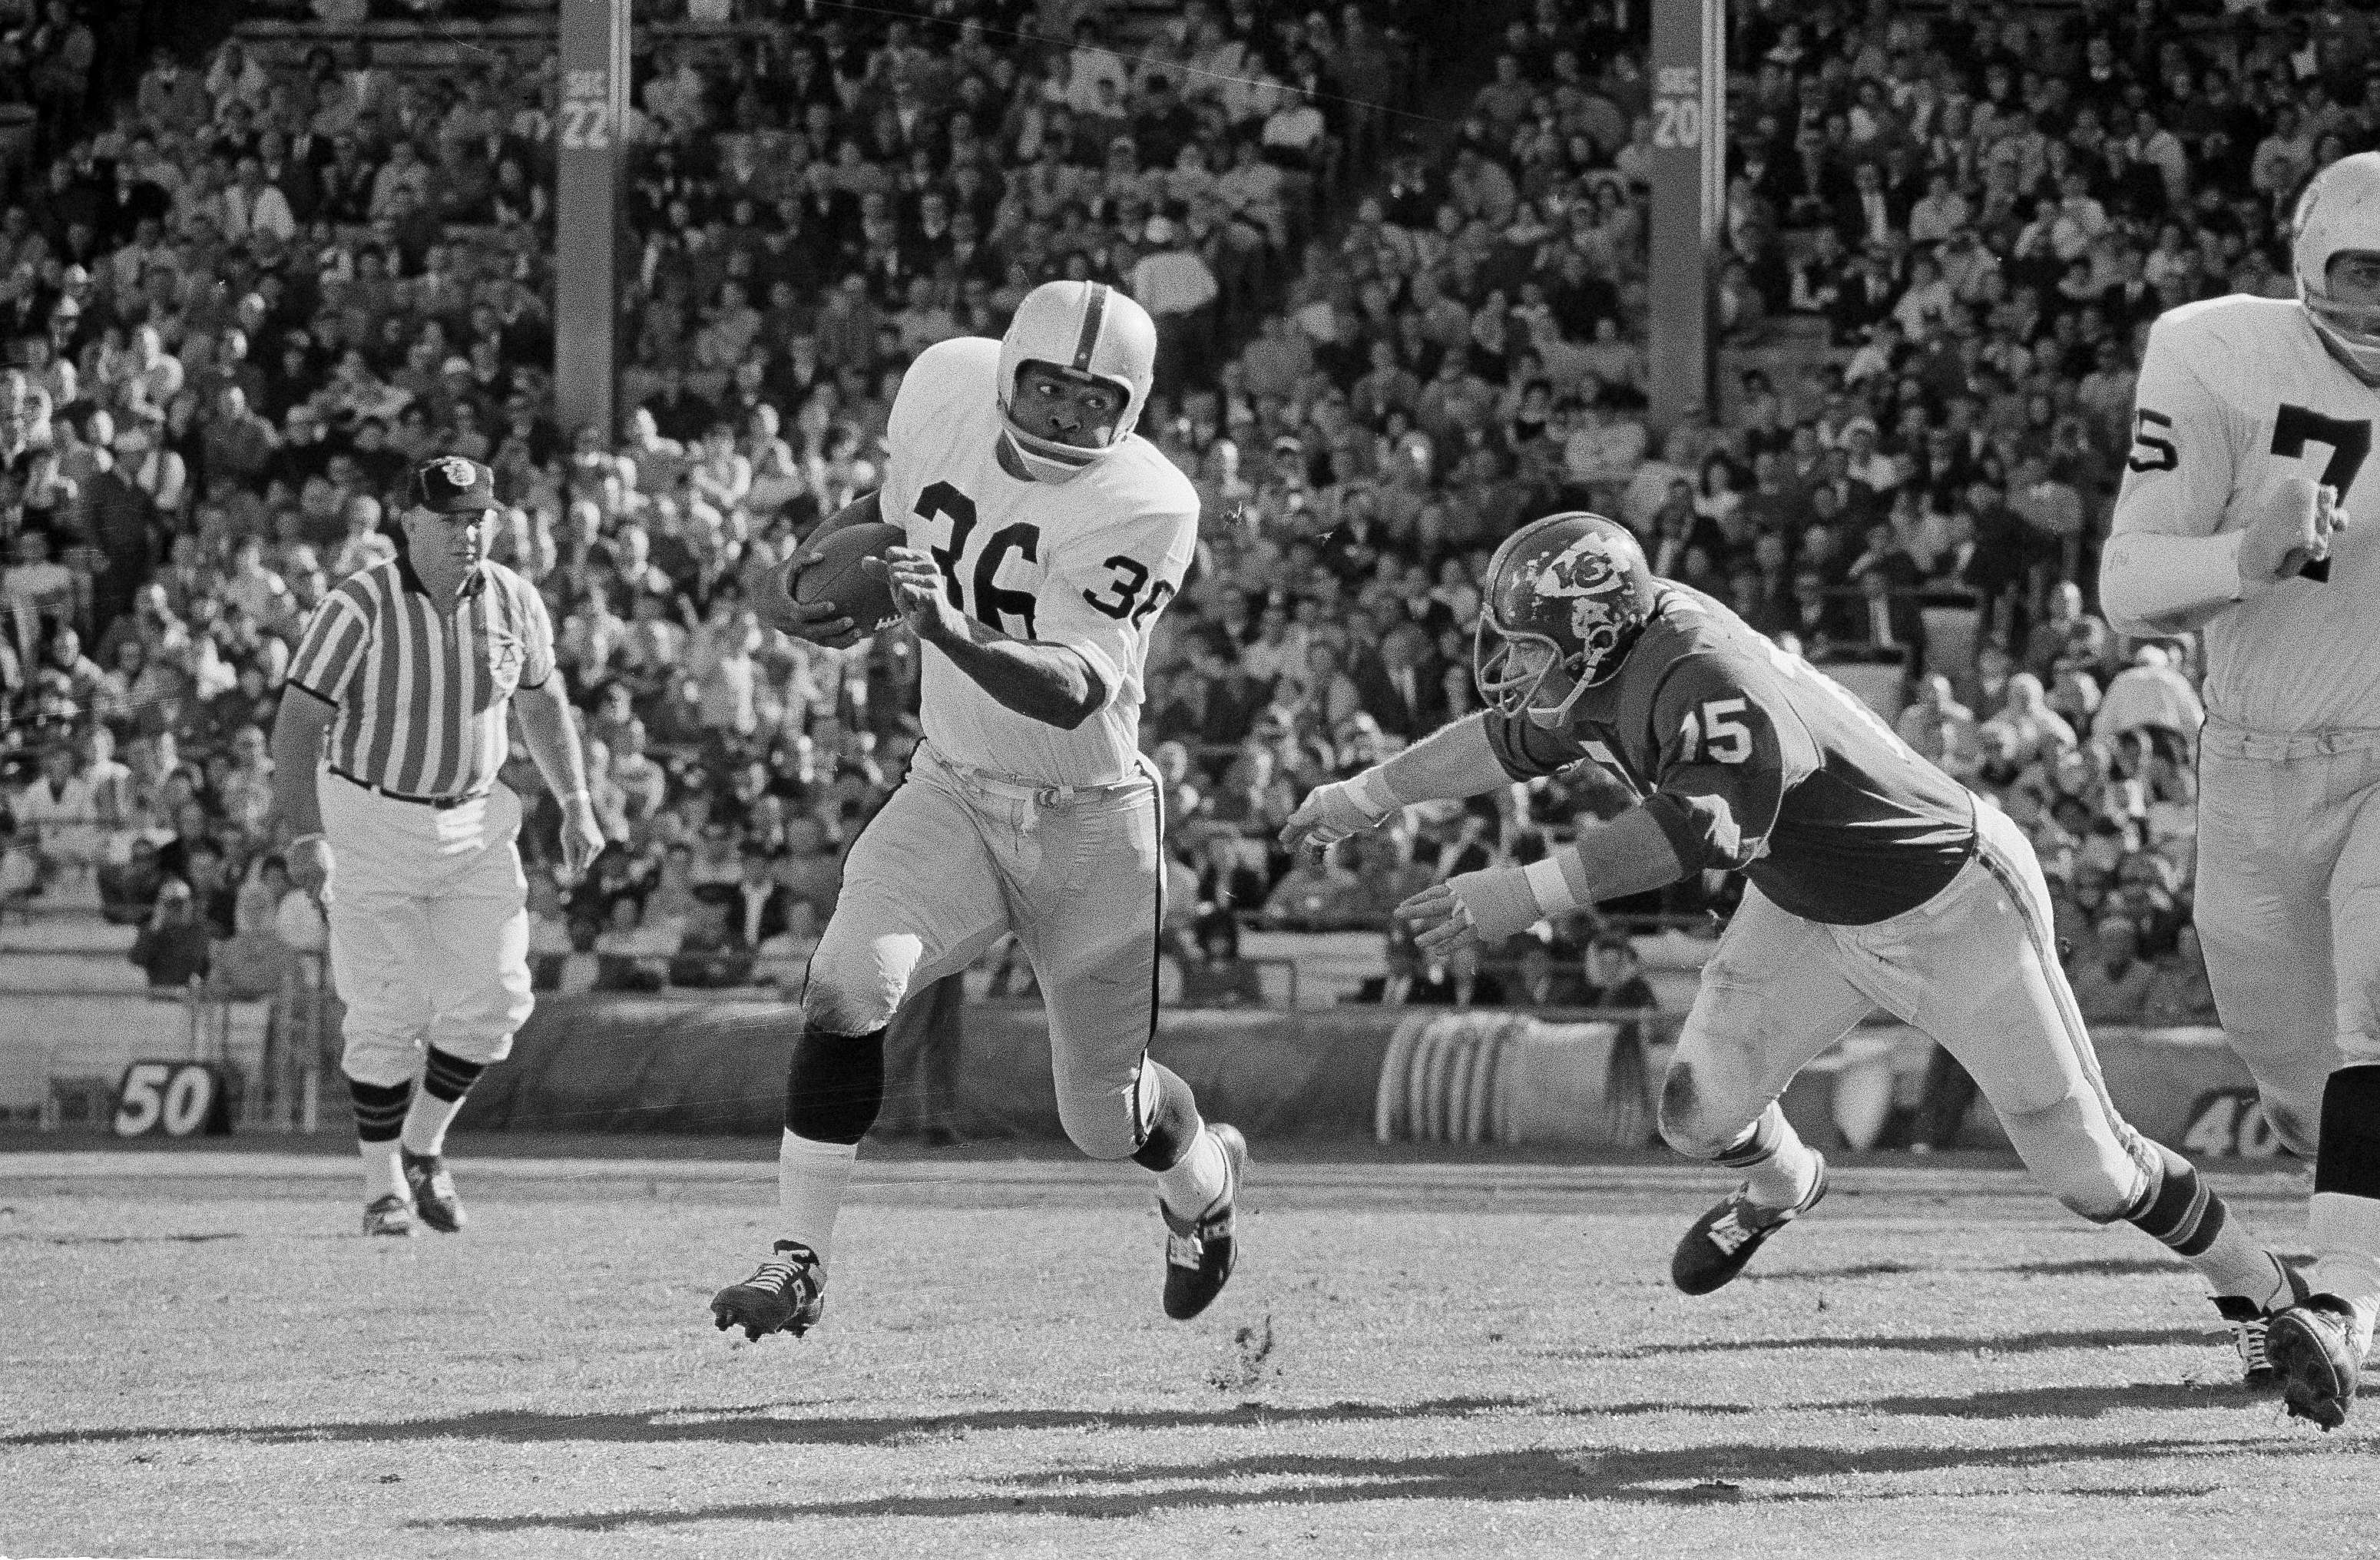 Clem Daniels (36) of the Oakland Raiders races around the right side of his line as Jerry Mays, right, of the Kansas City Chiefs moves in for the tackle, in Kansas City, Mo., Oct. 31, 1965. The Chiefs won 14-7. (William P. Straeter—AP)